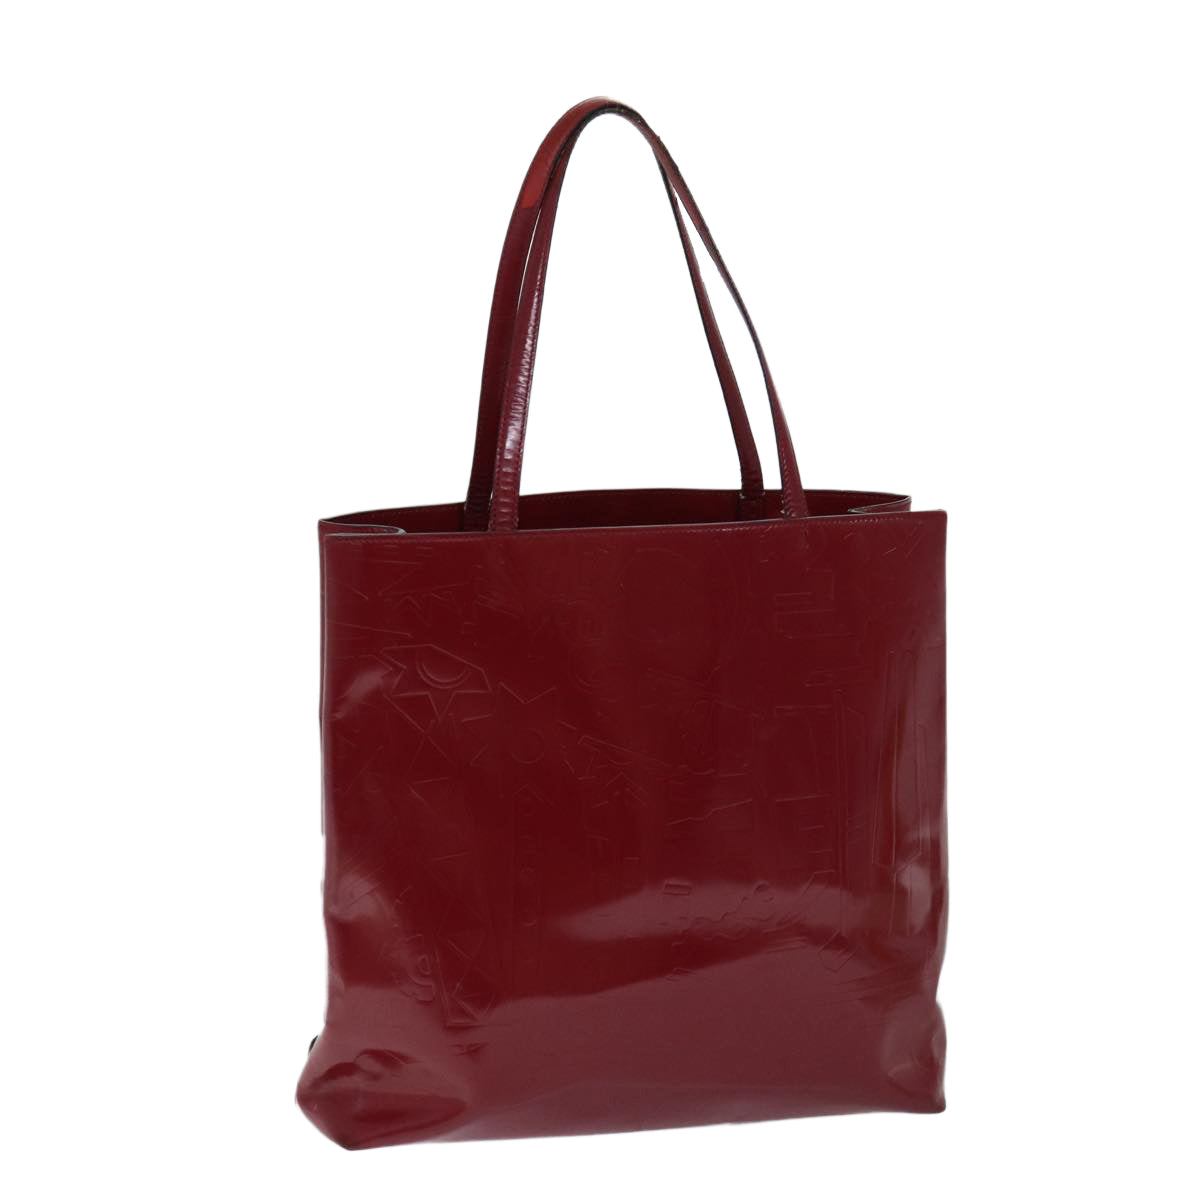 PRADA Tote Bag Patent leather Red Auth bs13314